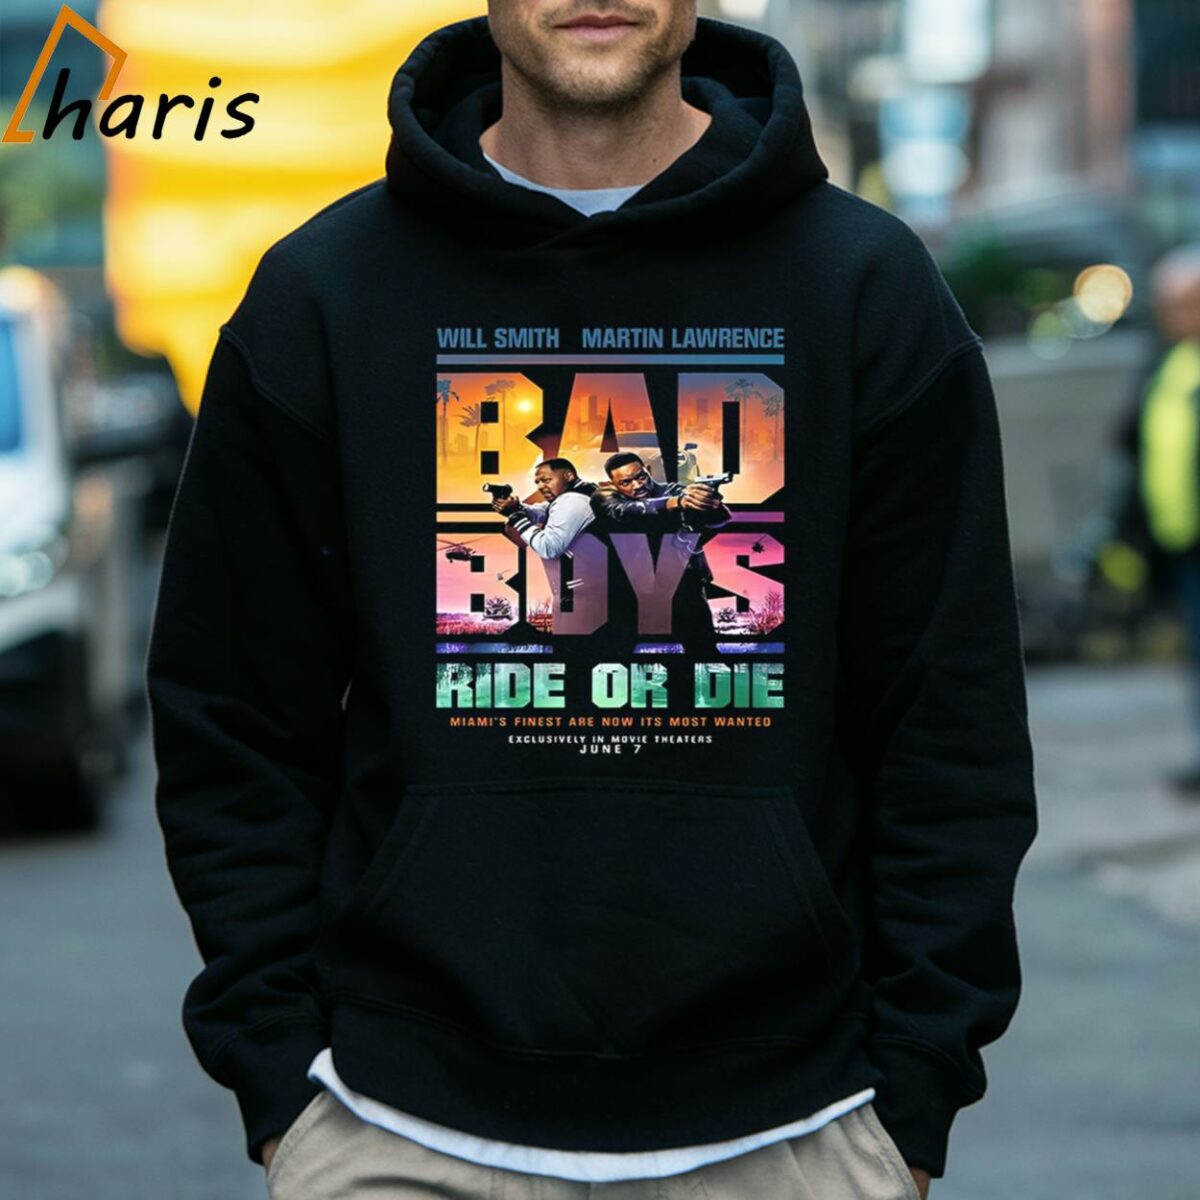 First Poster For Bad Boys Rise Or Die In Theaters On June 7 Unisex T Shirt 5 Hoodie